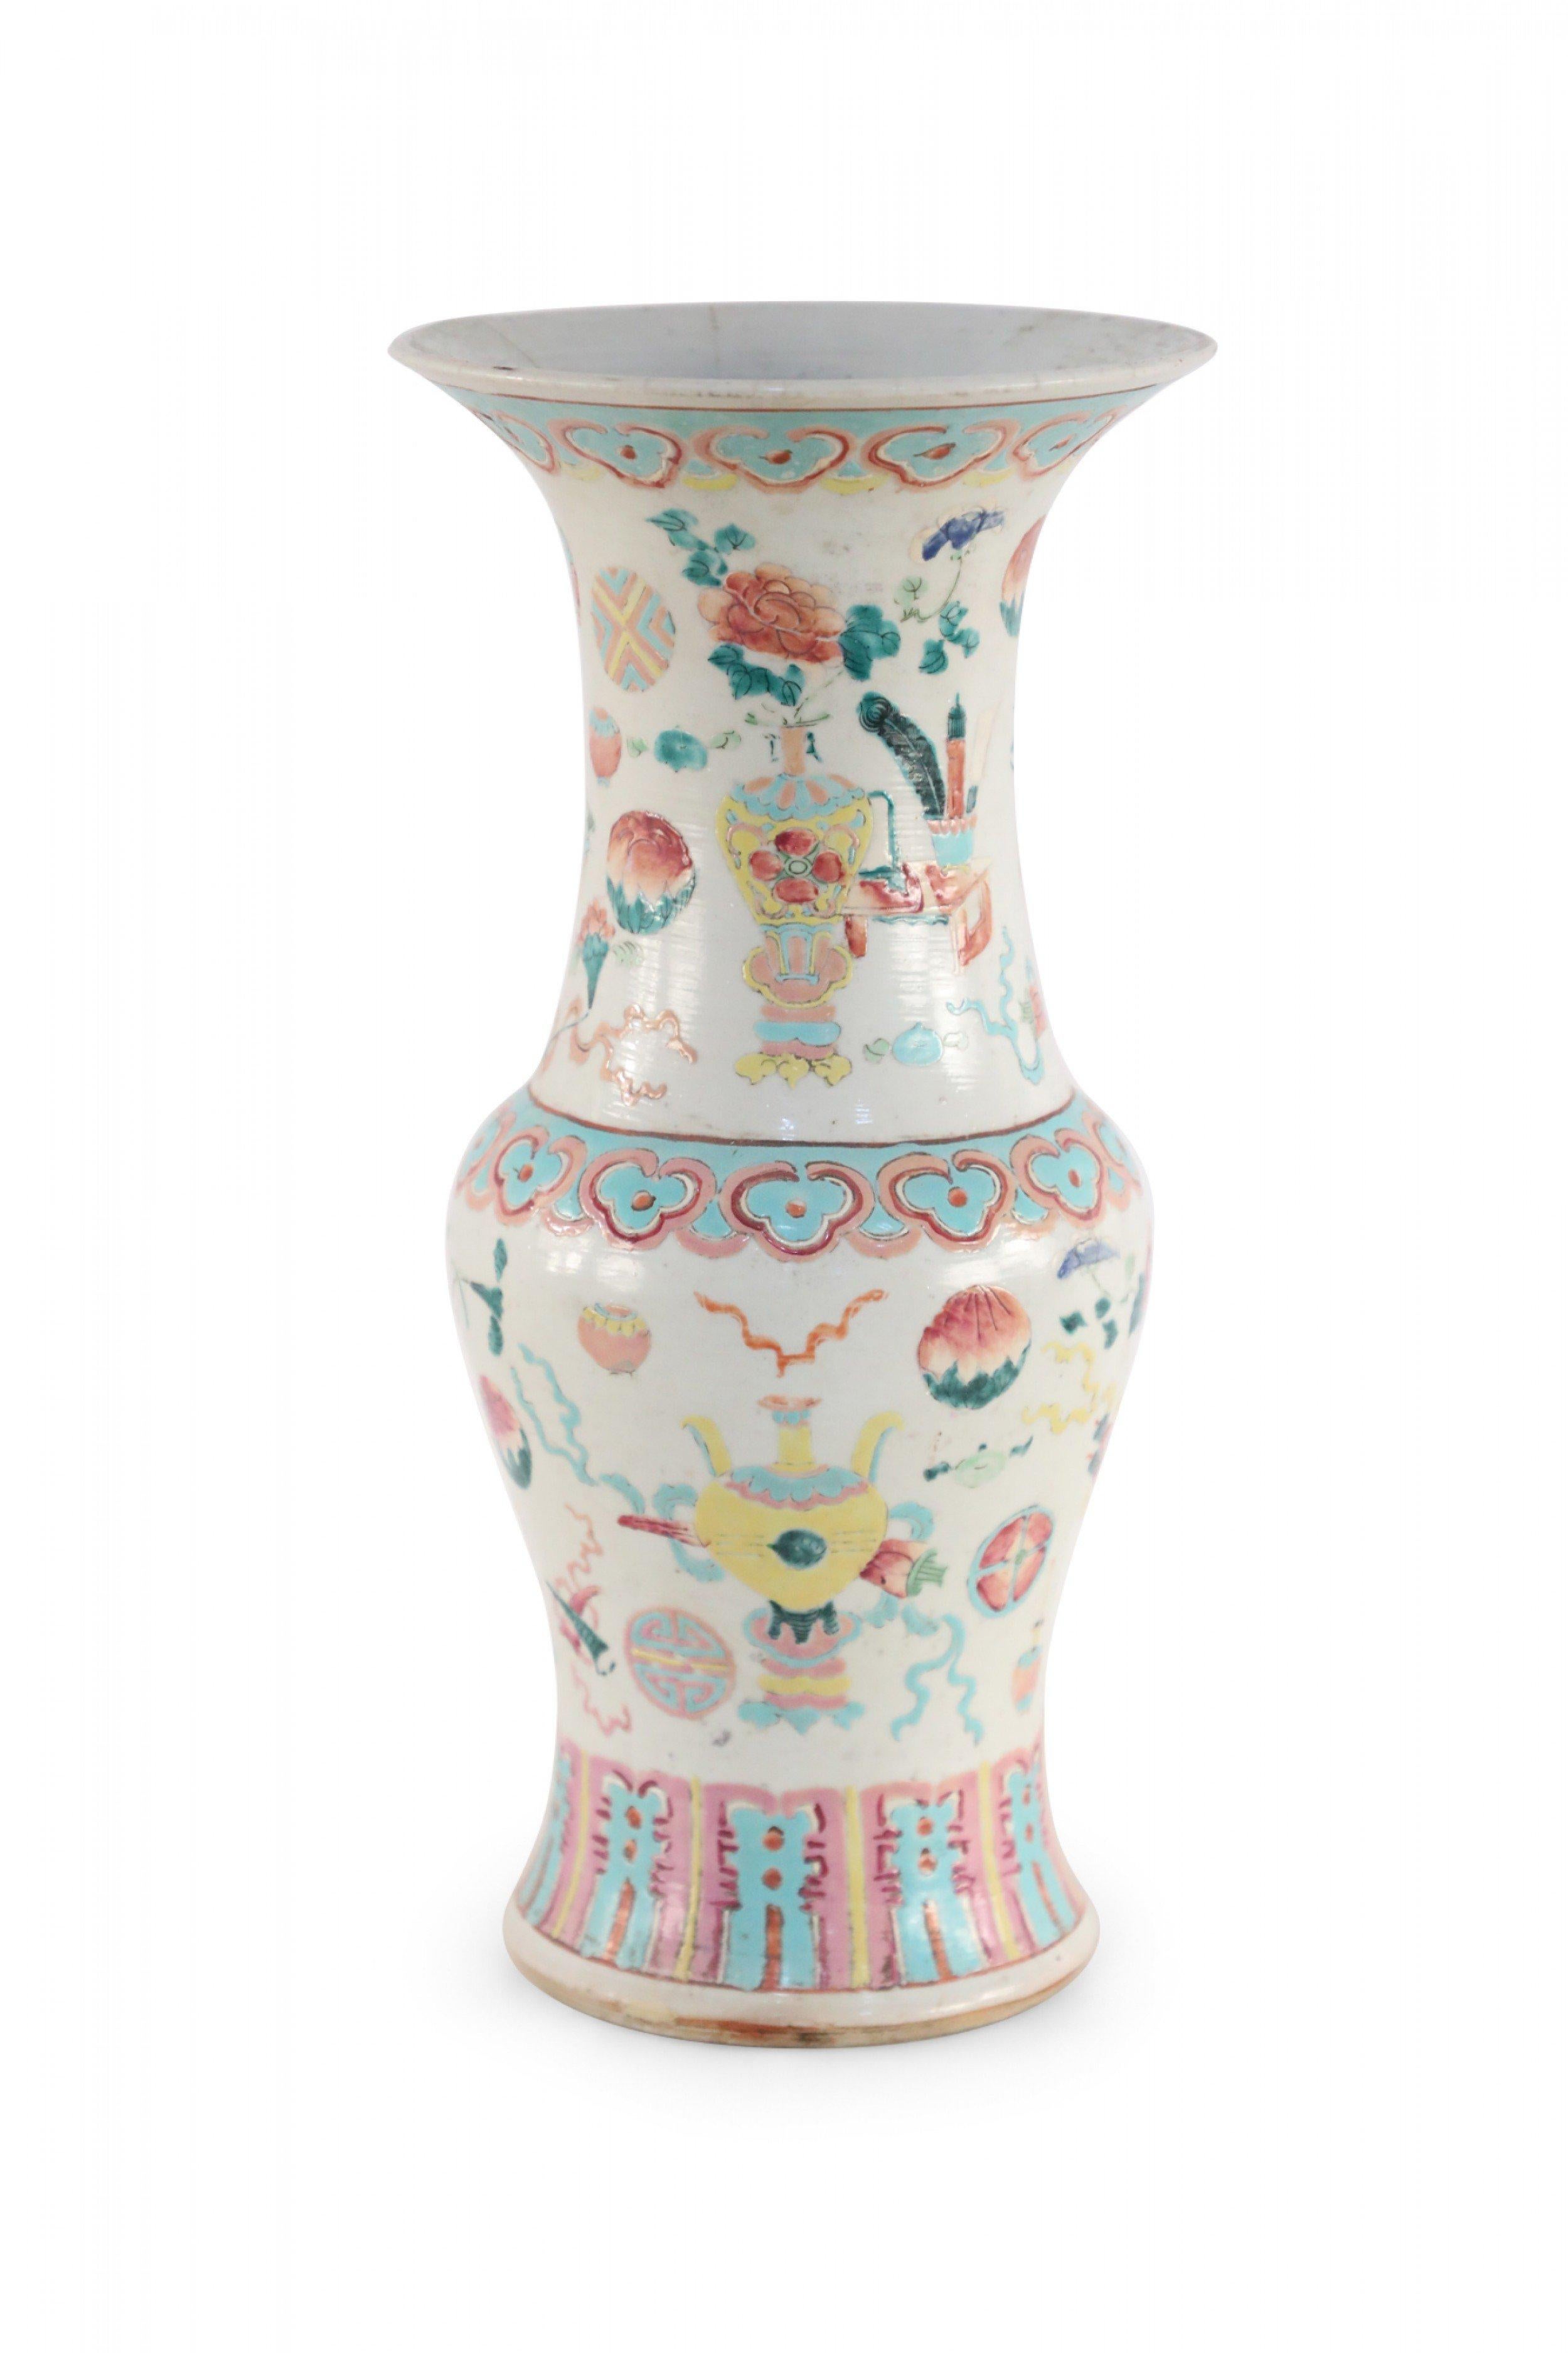 Antique Chinese (Early 20th Century) white porcelain urn painted with pink, light blue, and yellow bogu pattern - a traditional decorative theme that employs items like bronzeware, porcelain, jade pieces, paintings, calligraphy, and bonsai to